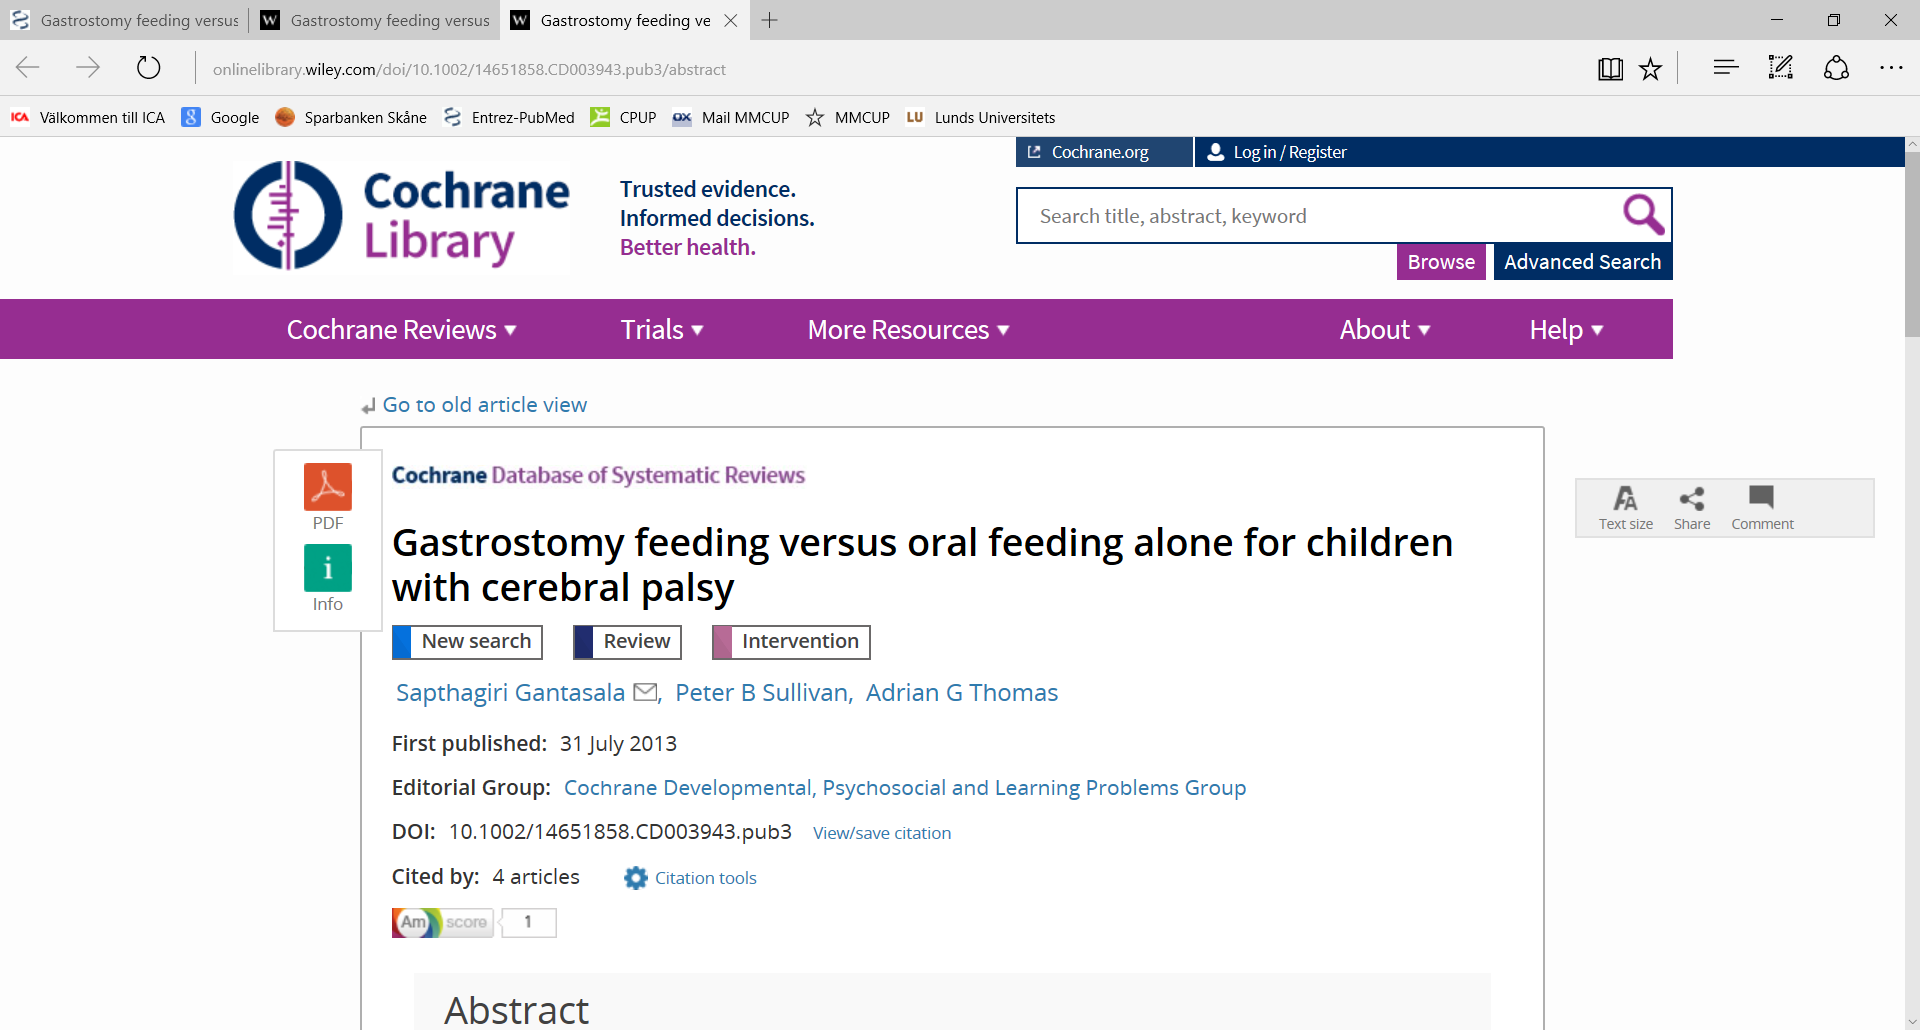 Gastrostomi vid CP evidensbaserad behandling? Authors' conclusions No studies found Considerable uncertainty about the effects of gastrostomy for children with cerebral palsy remains.